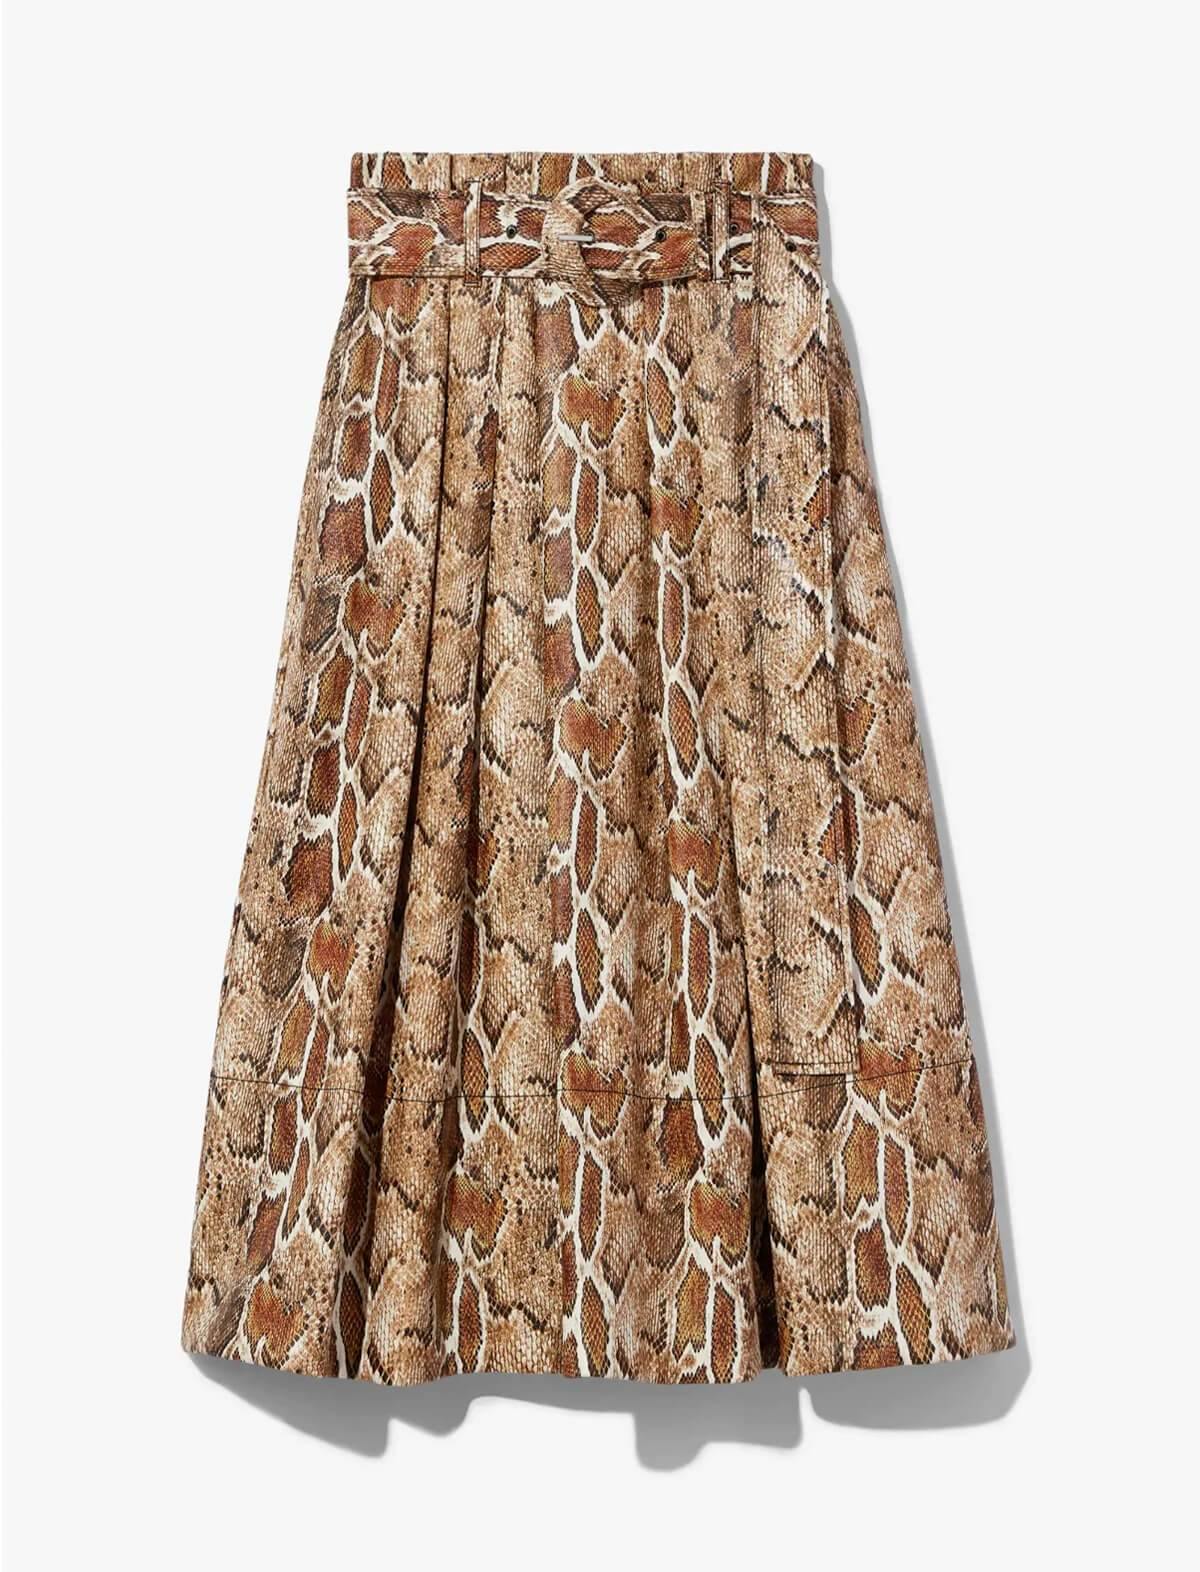 PROENZA SCHOULER WHITE LABEL Pleated Skirt in Cider Snake Print | CLOSET Singapore